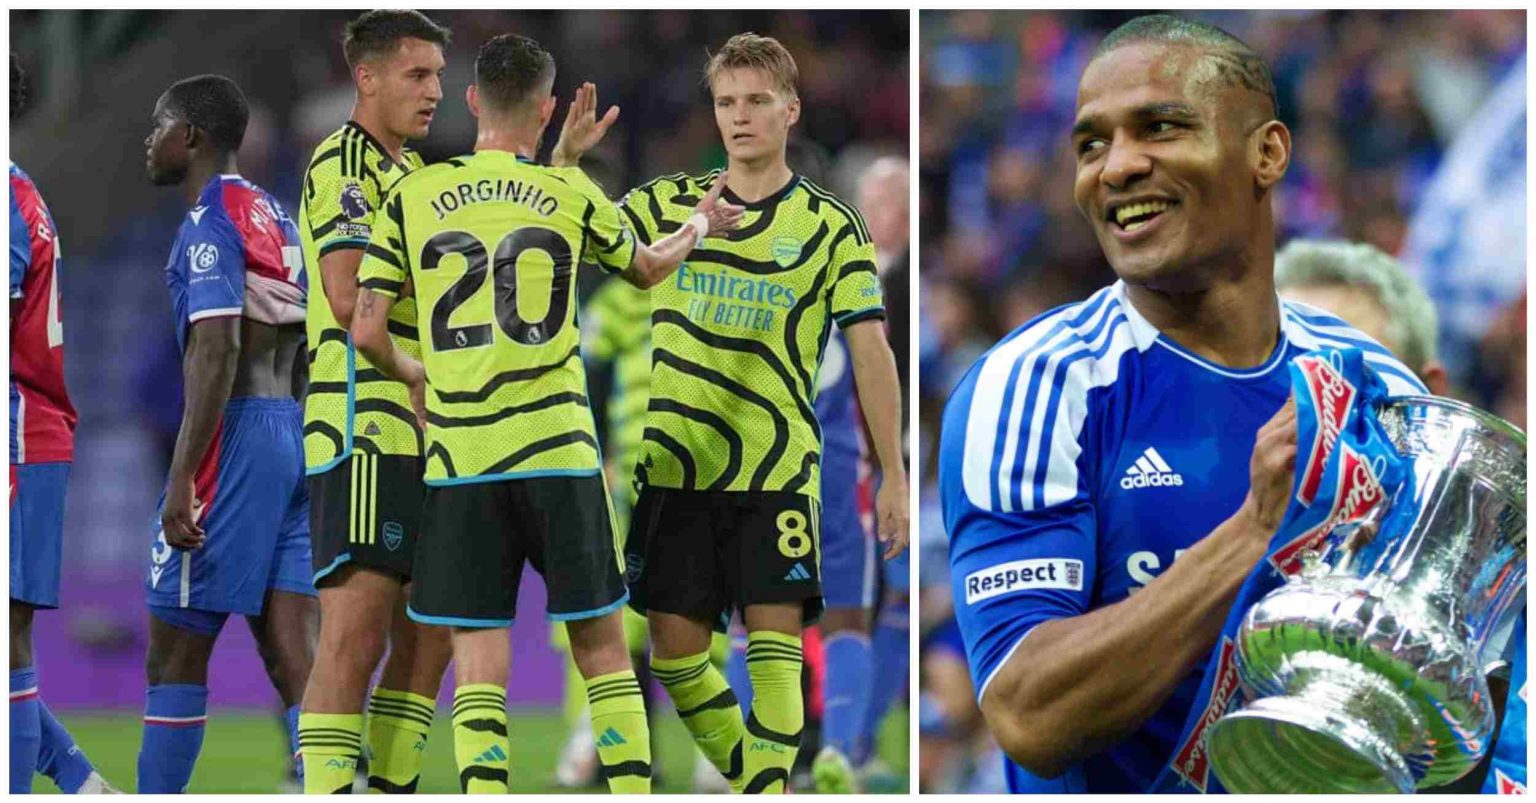 'I would pick Liverpool, Newcastle and Chelsea': Ex blue Florent Malouda downplays Arsenals' chances of finishing inside the top four this season